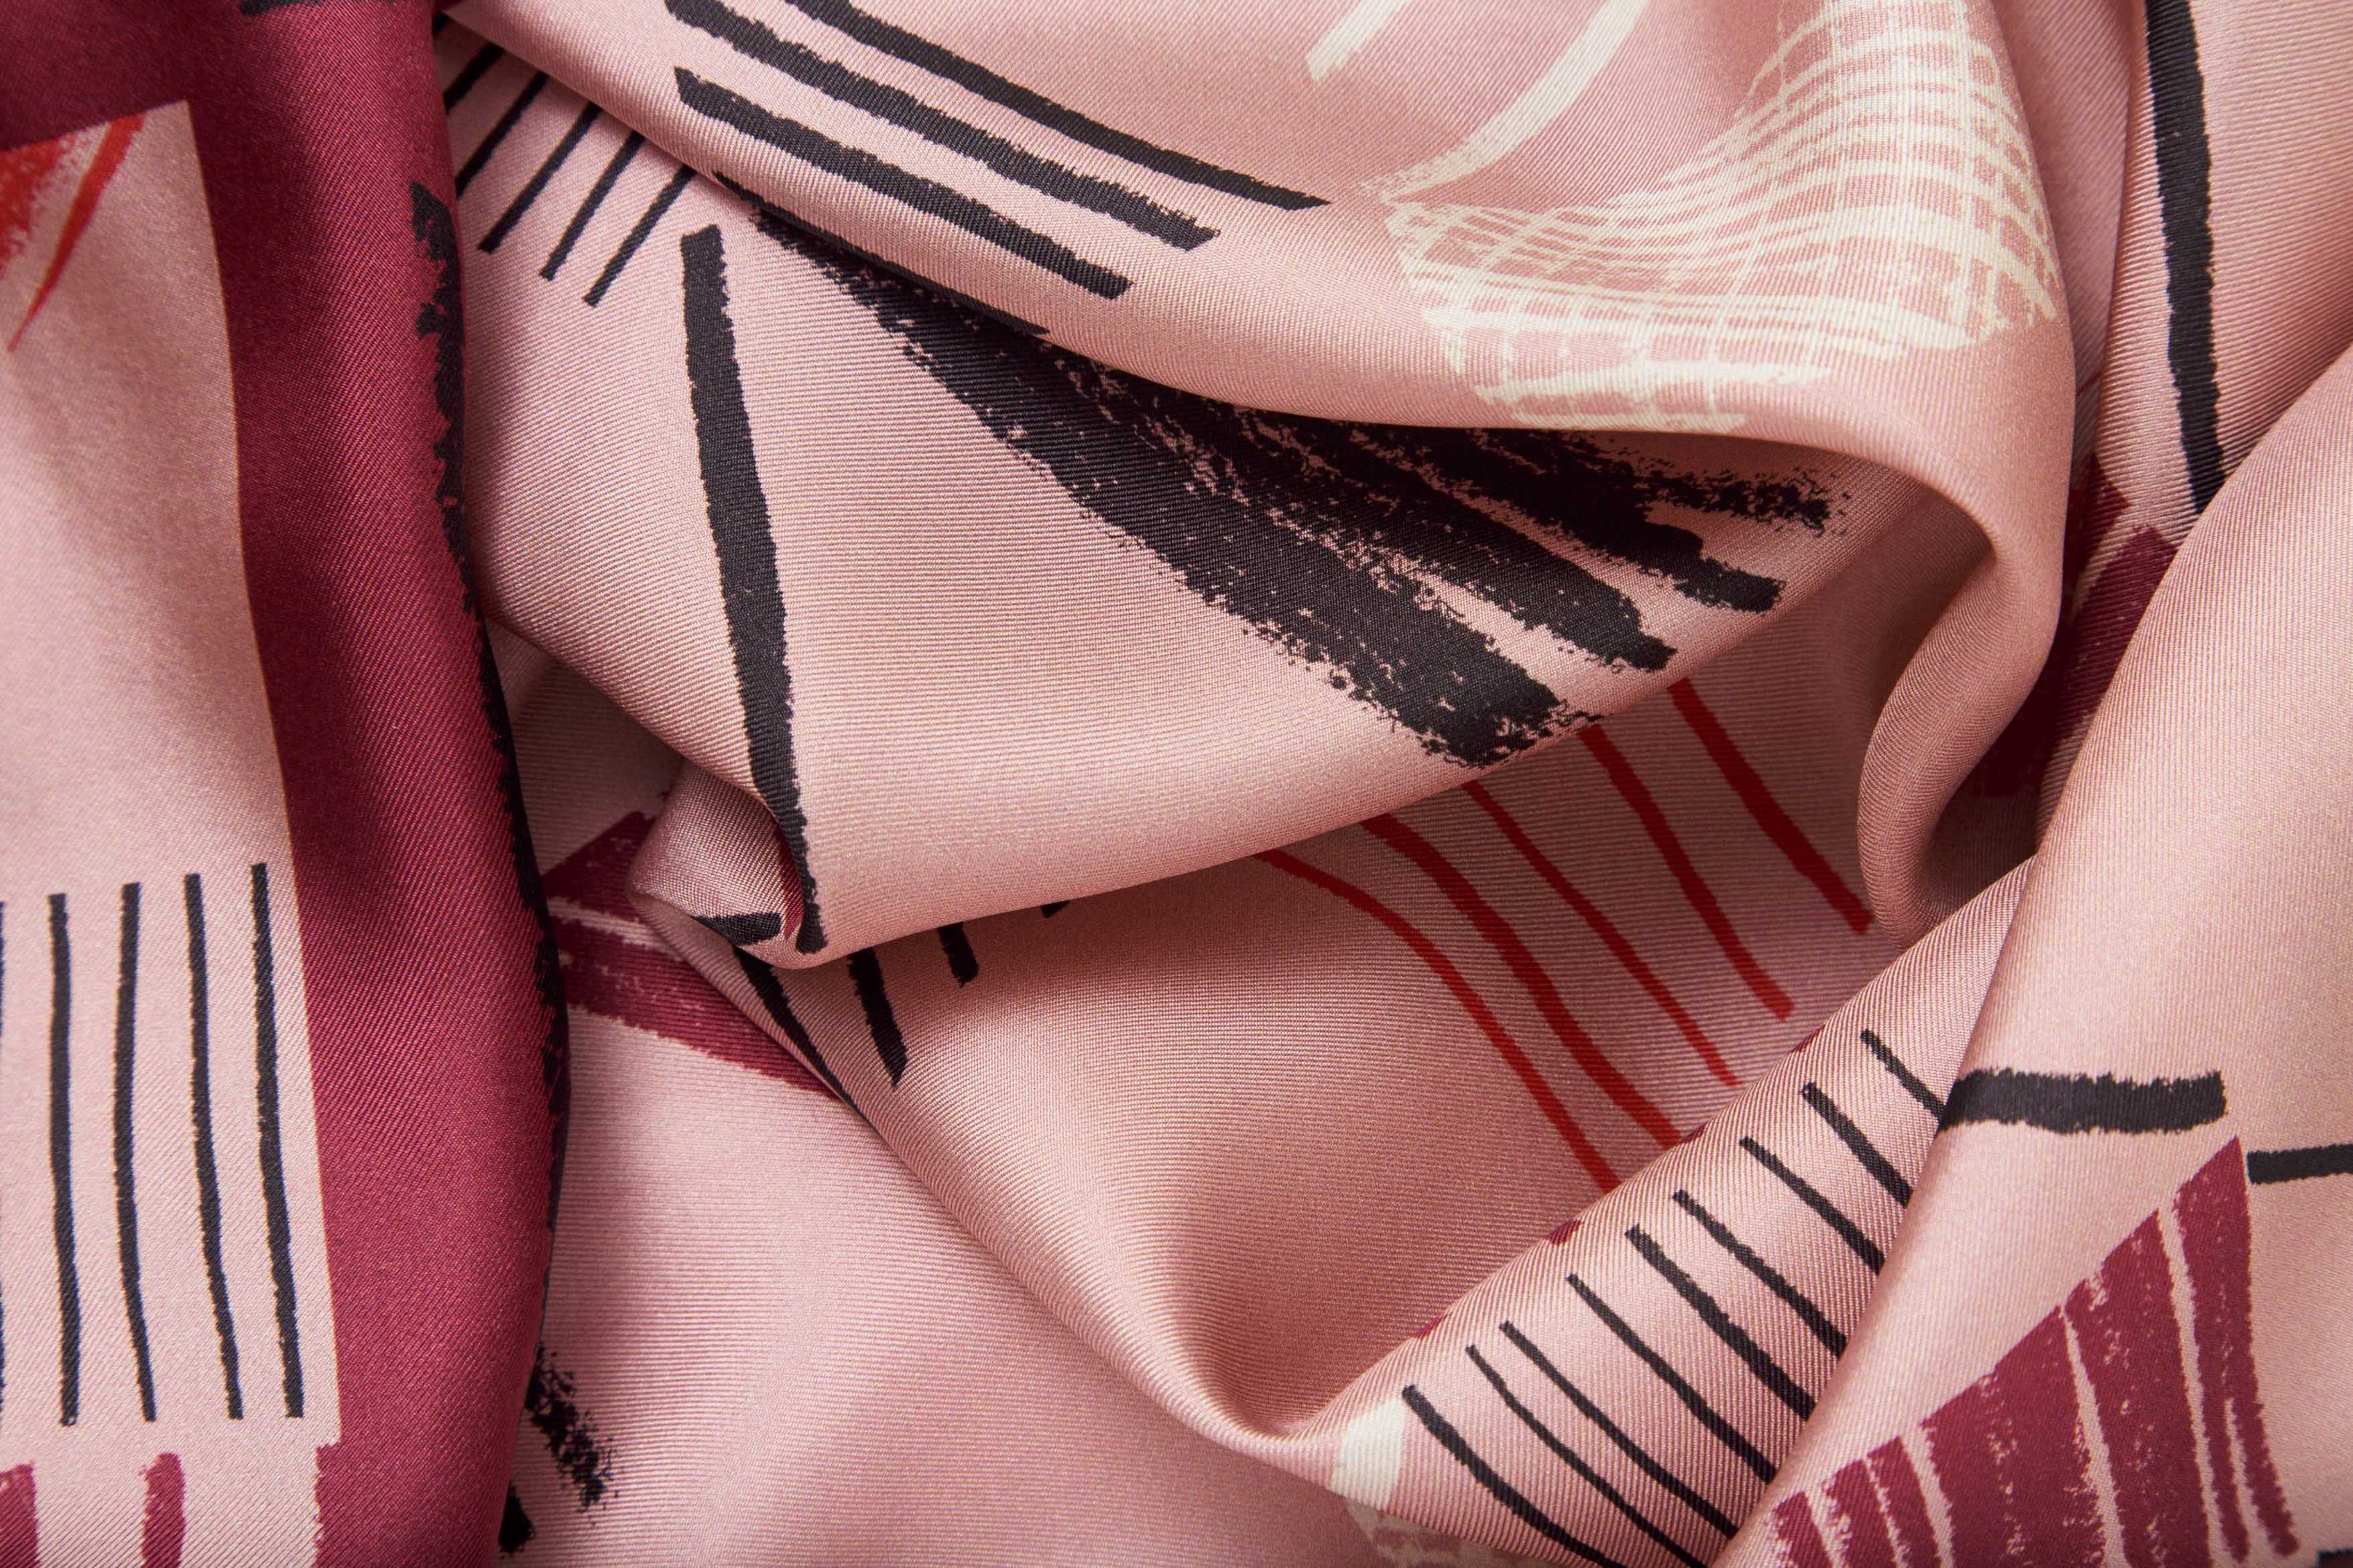 Close-up image of 100% silk square scarf featuring a motif of charcoal, cherry, raspberry and cream colored imperfect lines making geometric rectangle and triangle shapes throughout the scarf. Blush pink background and rich berry colored border on the scarf. Illustrates the lightly ridged texture of the silk twill along with the rich color tones and luminous nature of the silk scarf.